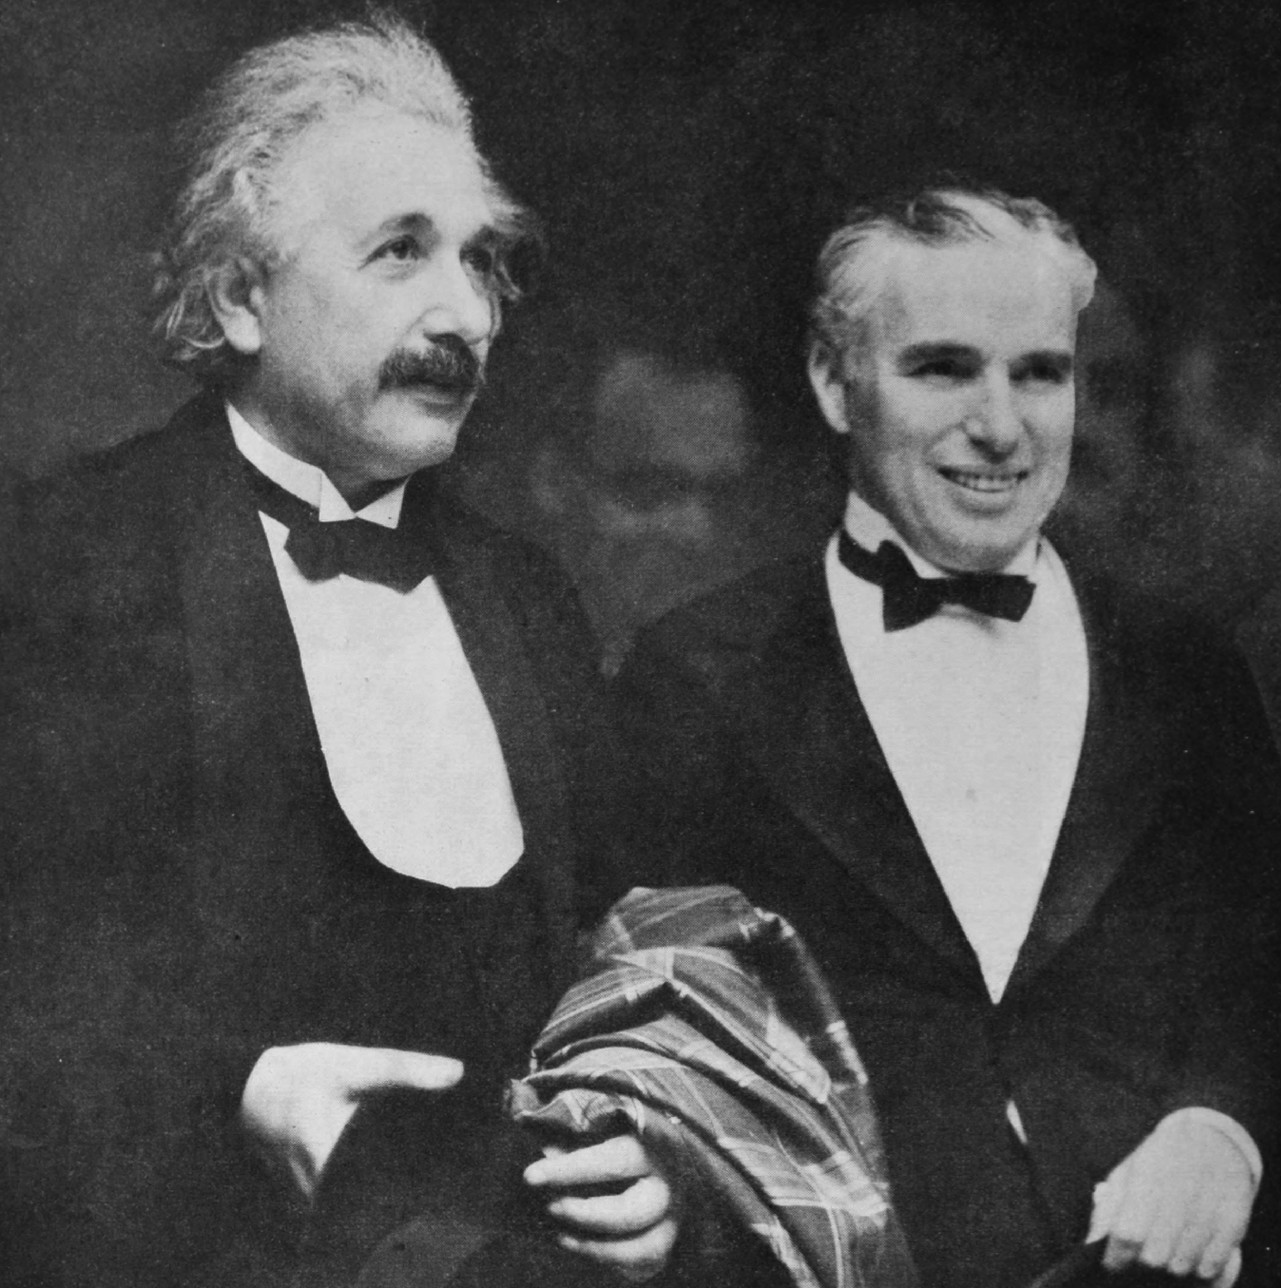 I bet you anything, that at least one of these two was rh negative. #AlbertEinstein #CharlieChaplin